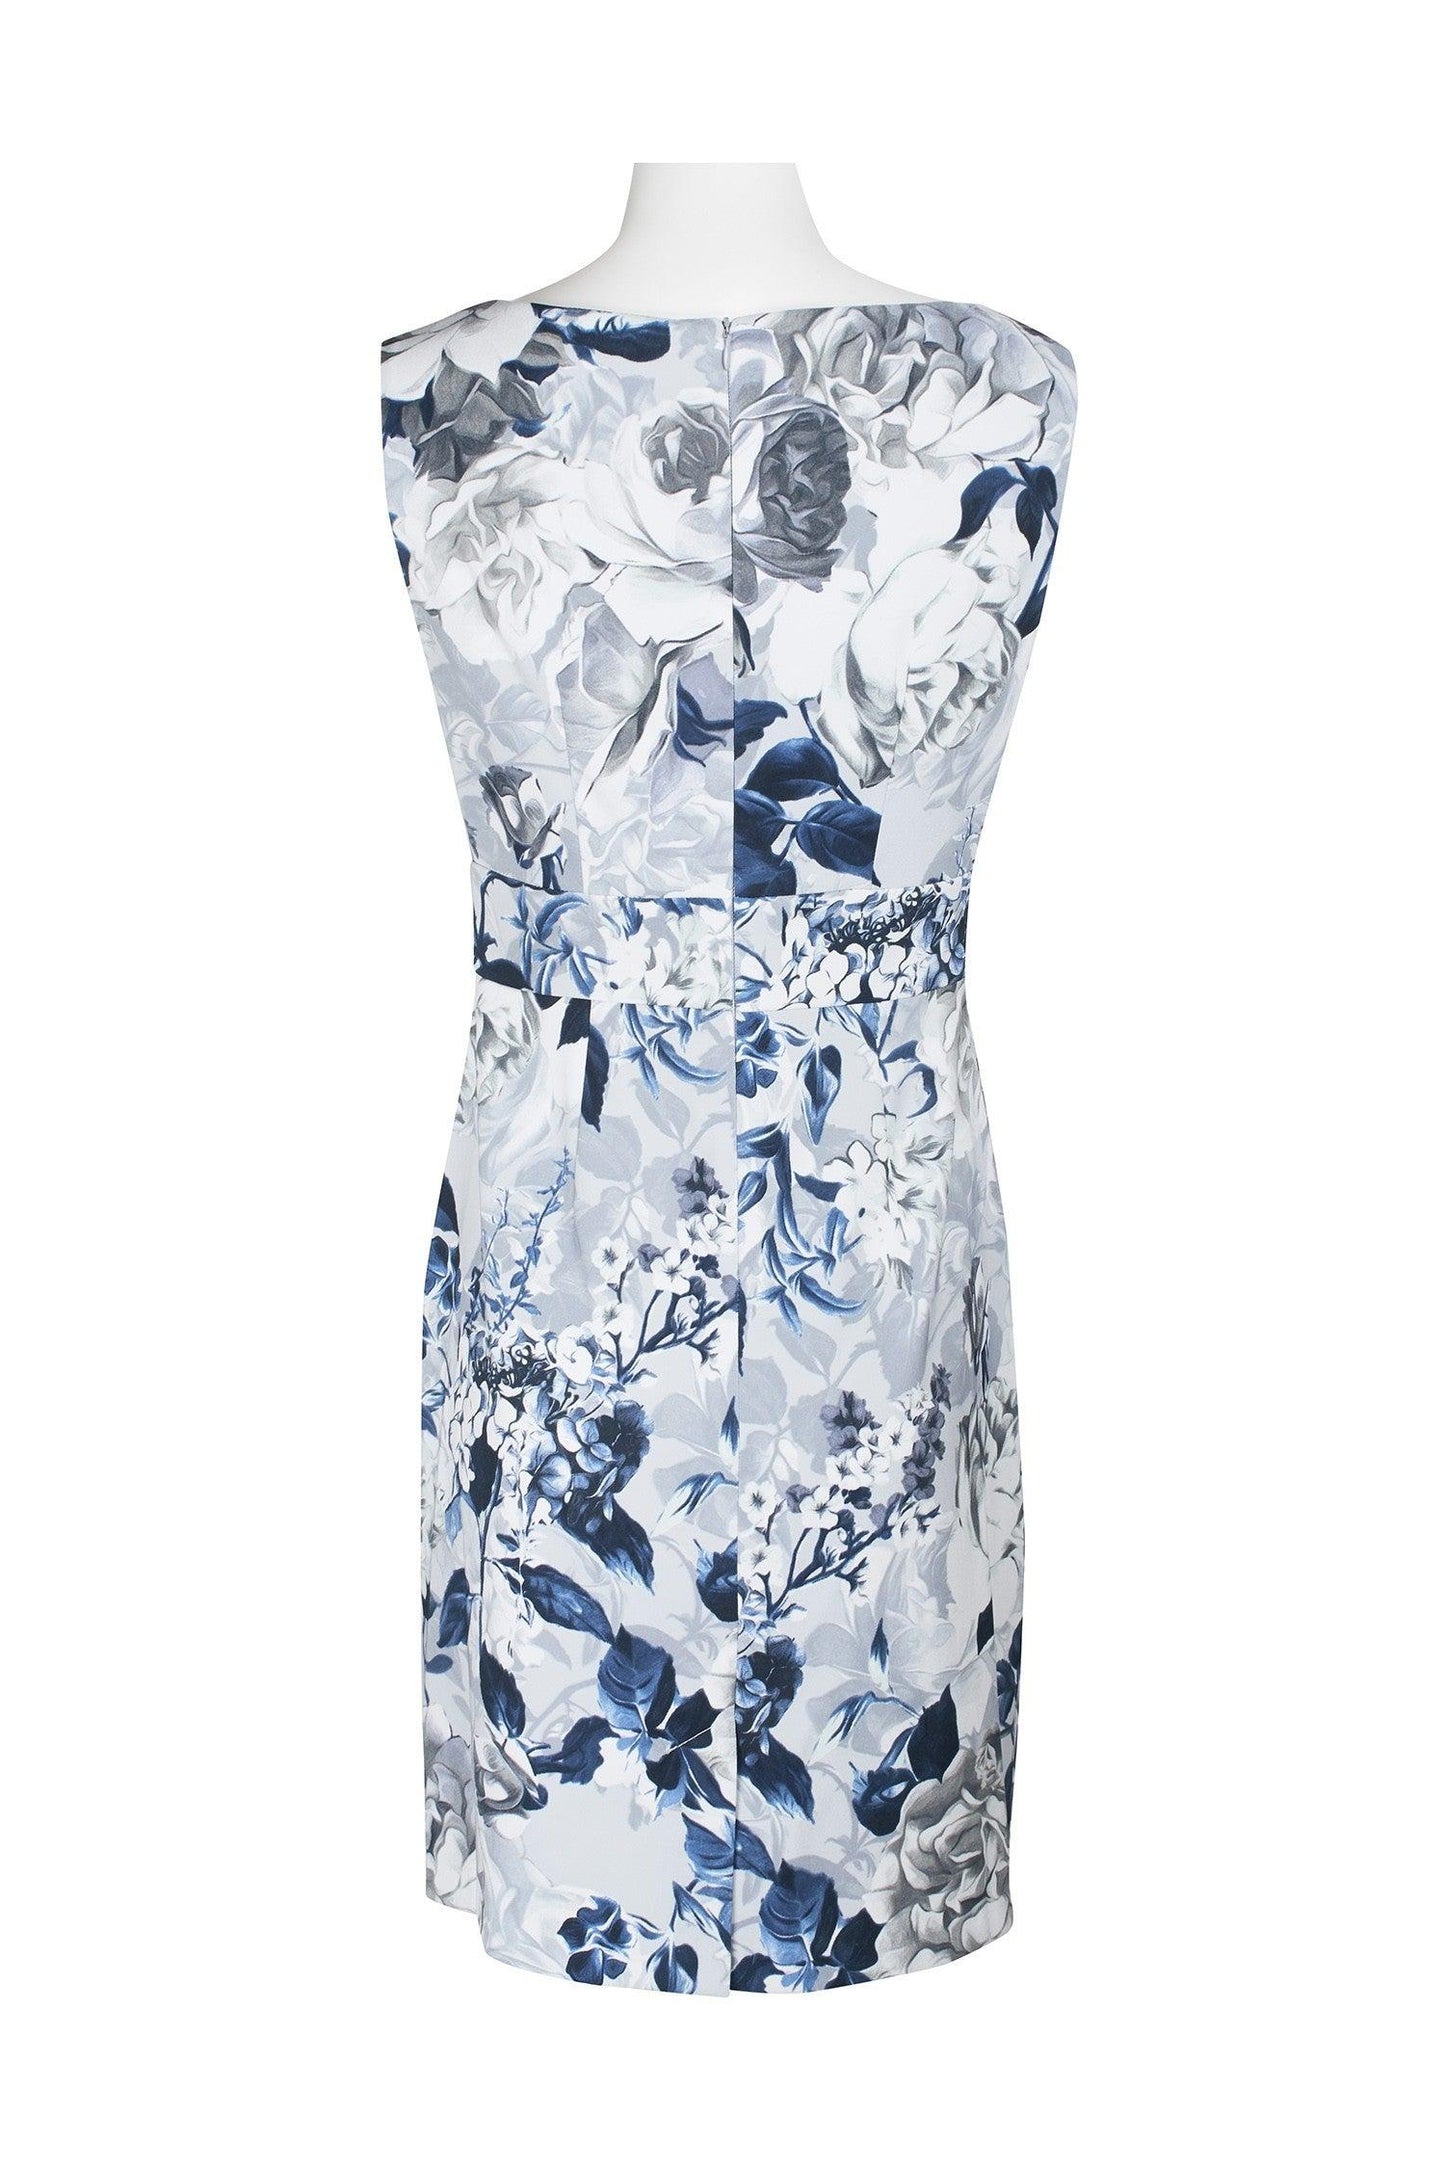 Connected Apparel Short Sleeveless Floral Dress - The Dress Outlet